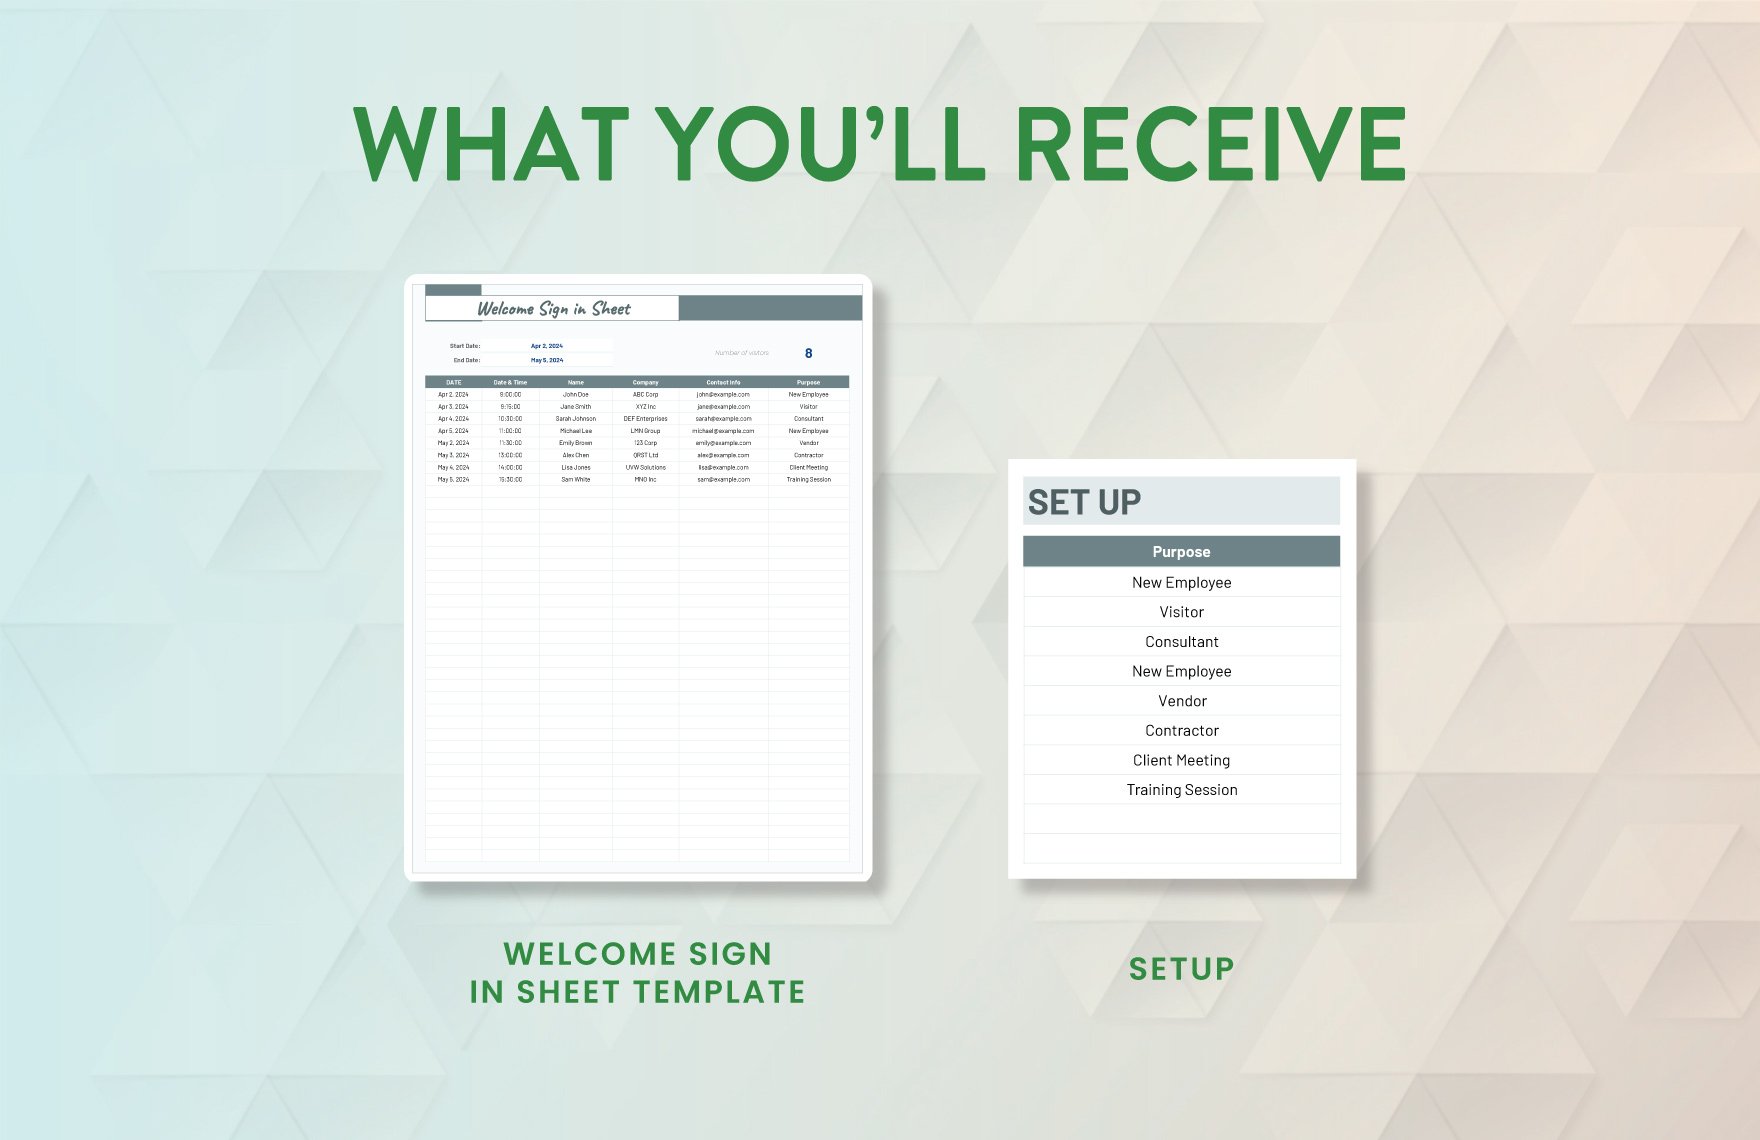 Welcome Sign in Sheet Template